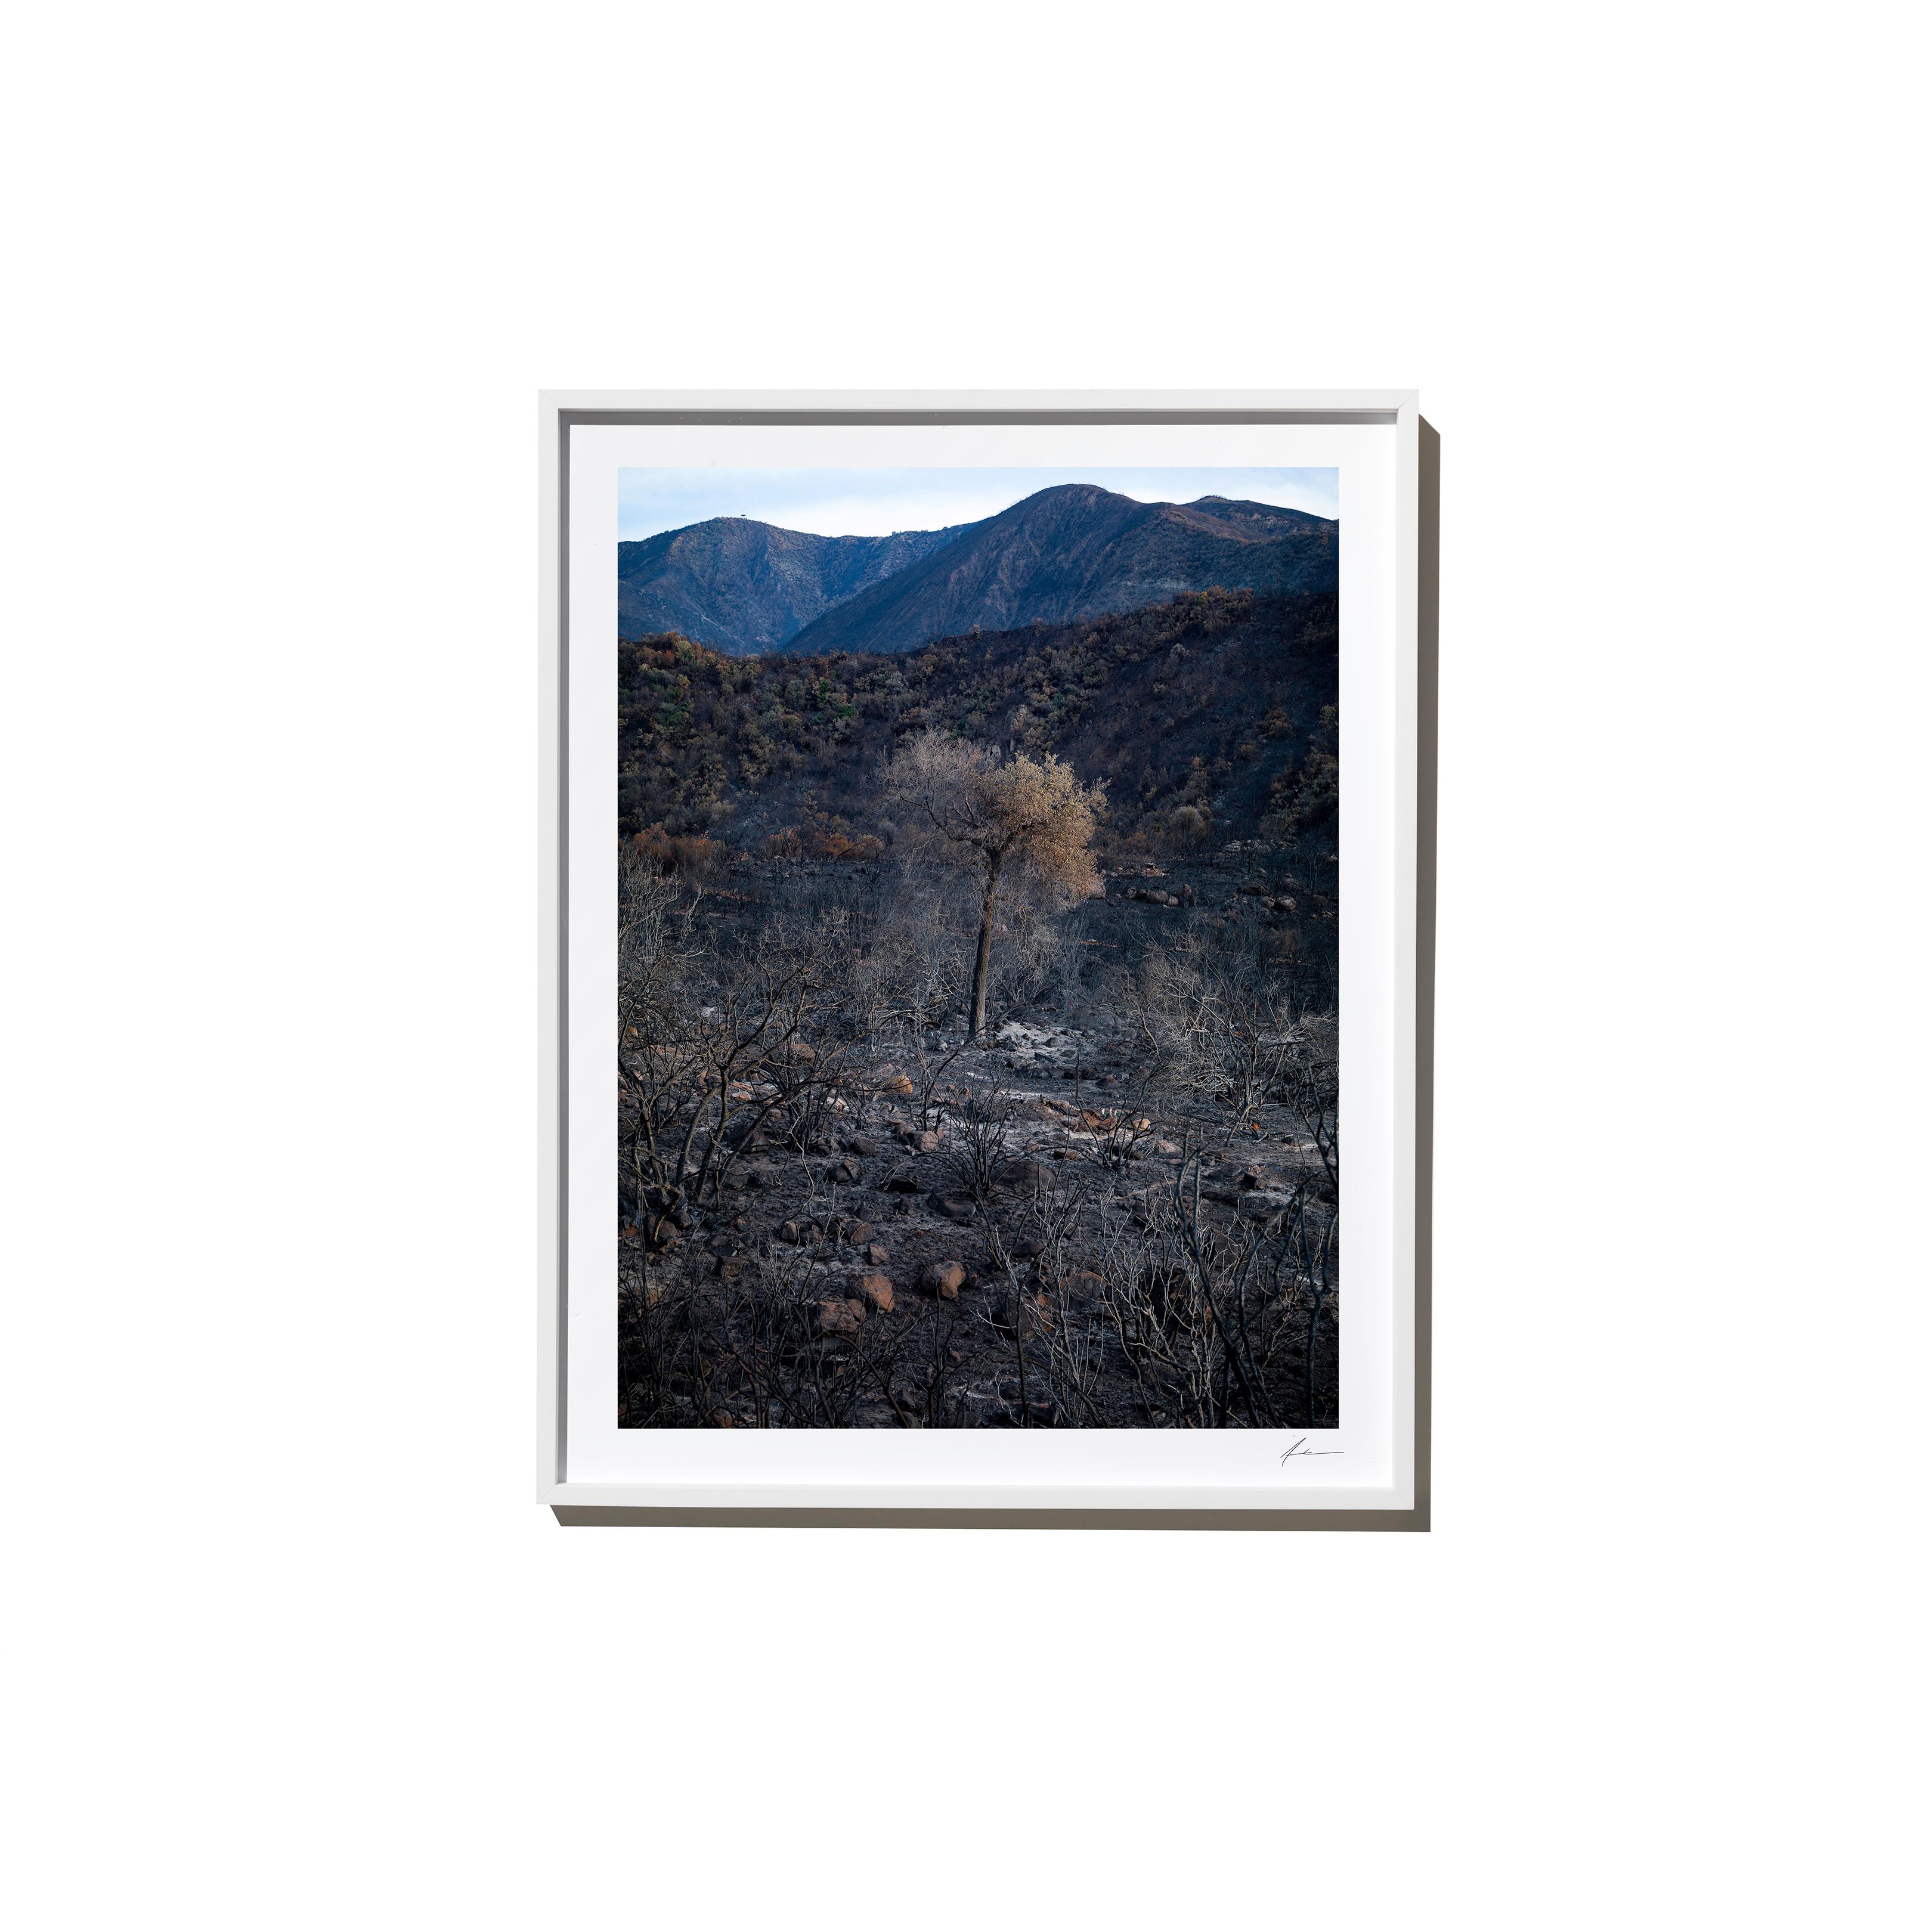 "Impossible" is a framed color landscape photograph by Los Angeles-based photographer Timothy Hogan. 

Frame available in white or black, please specify on order. Please allow 15 days for production before shipping.

Editions and sizes as